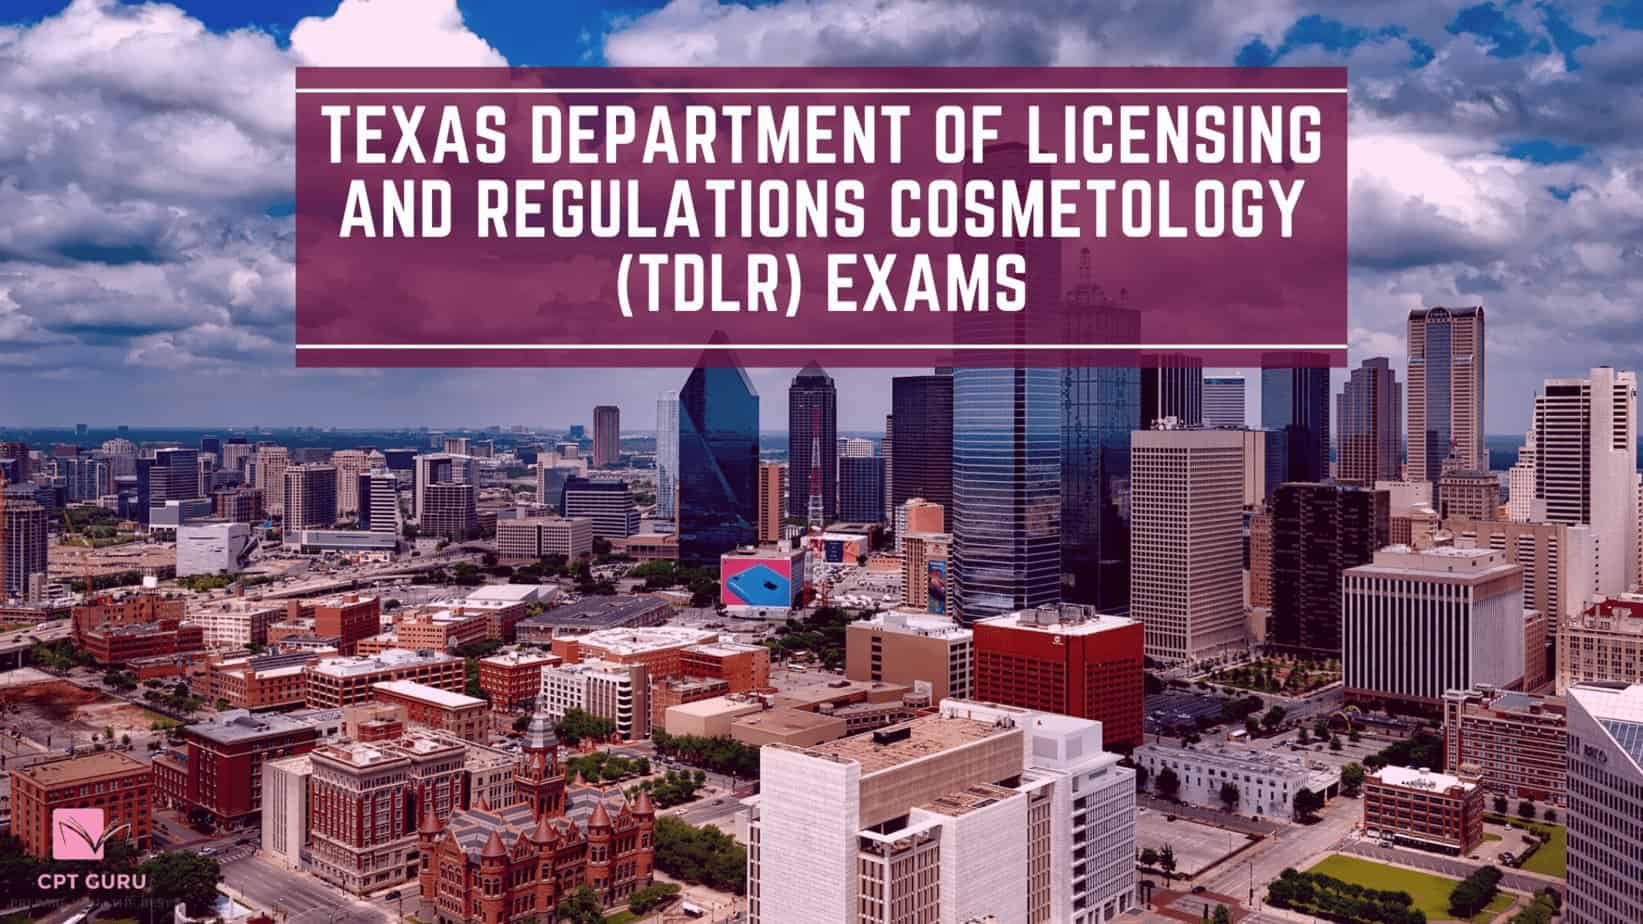 Texas Department of Licensing and Regulations Cosmetology (TDLR) exams